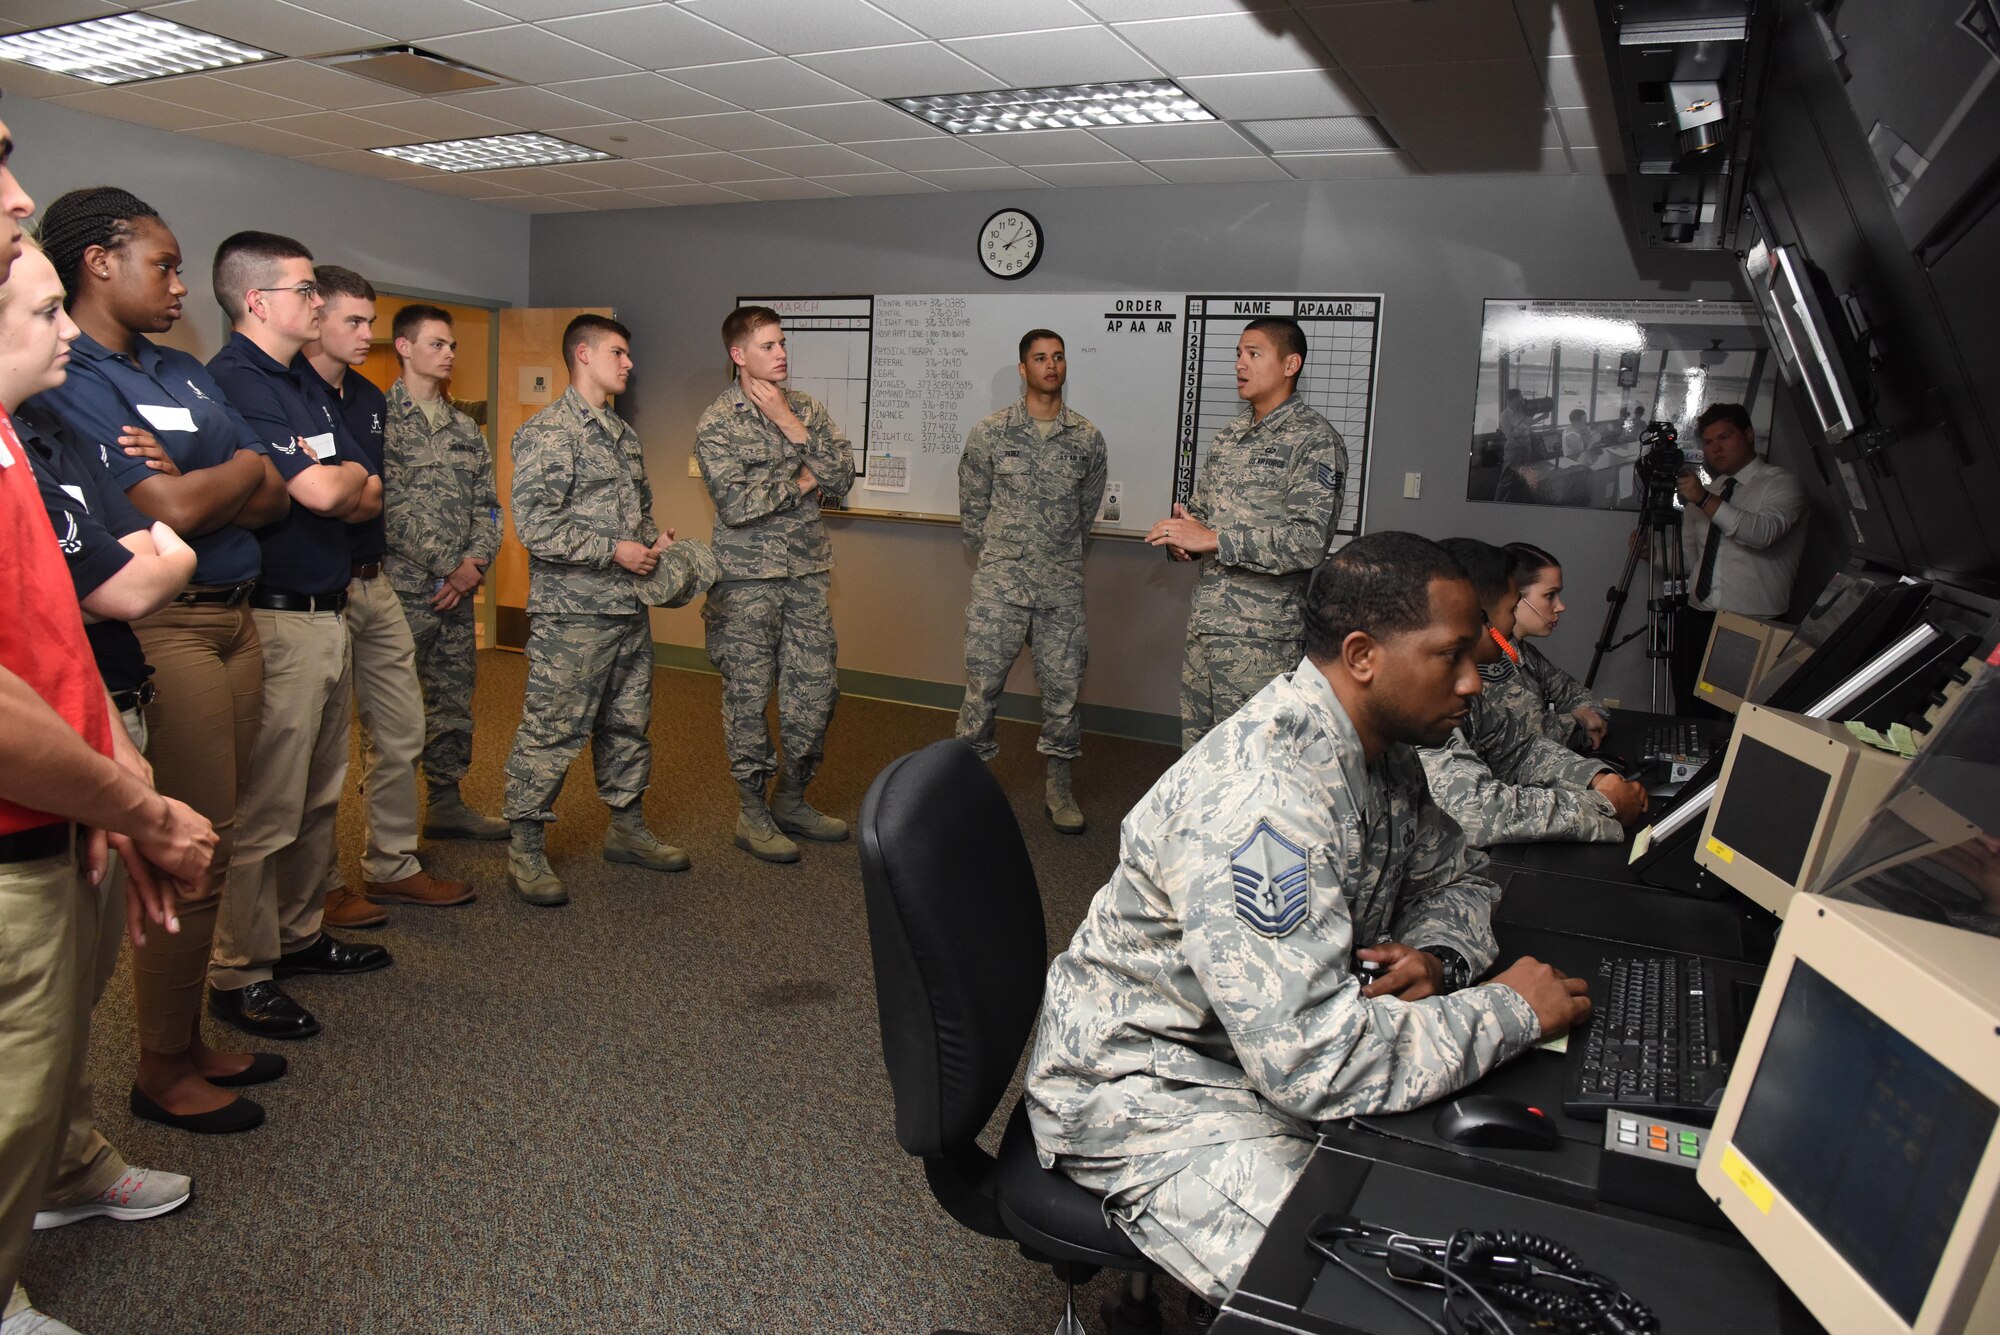 Tech Sgt. Hugh Cross, 334th Training Squadron instructor, briefs Air Force ROTC cadets on an air traffic control radar system in Cody Hall during Pathways to Blue April 7, 2017, on Keesler Air Force Base, Miss. Pathways to Blue, a diversity and inclusion outreach event hosted by 2nd Air Force with the support of the 81st Training Wing and the 403rd Wing. The event provided the 178 cadets who traveled here from seven detachments a chance to interact with officers from 36 different specialties from across the Air Force. (U.S. Air Force photo by Kemberly Groue)

